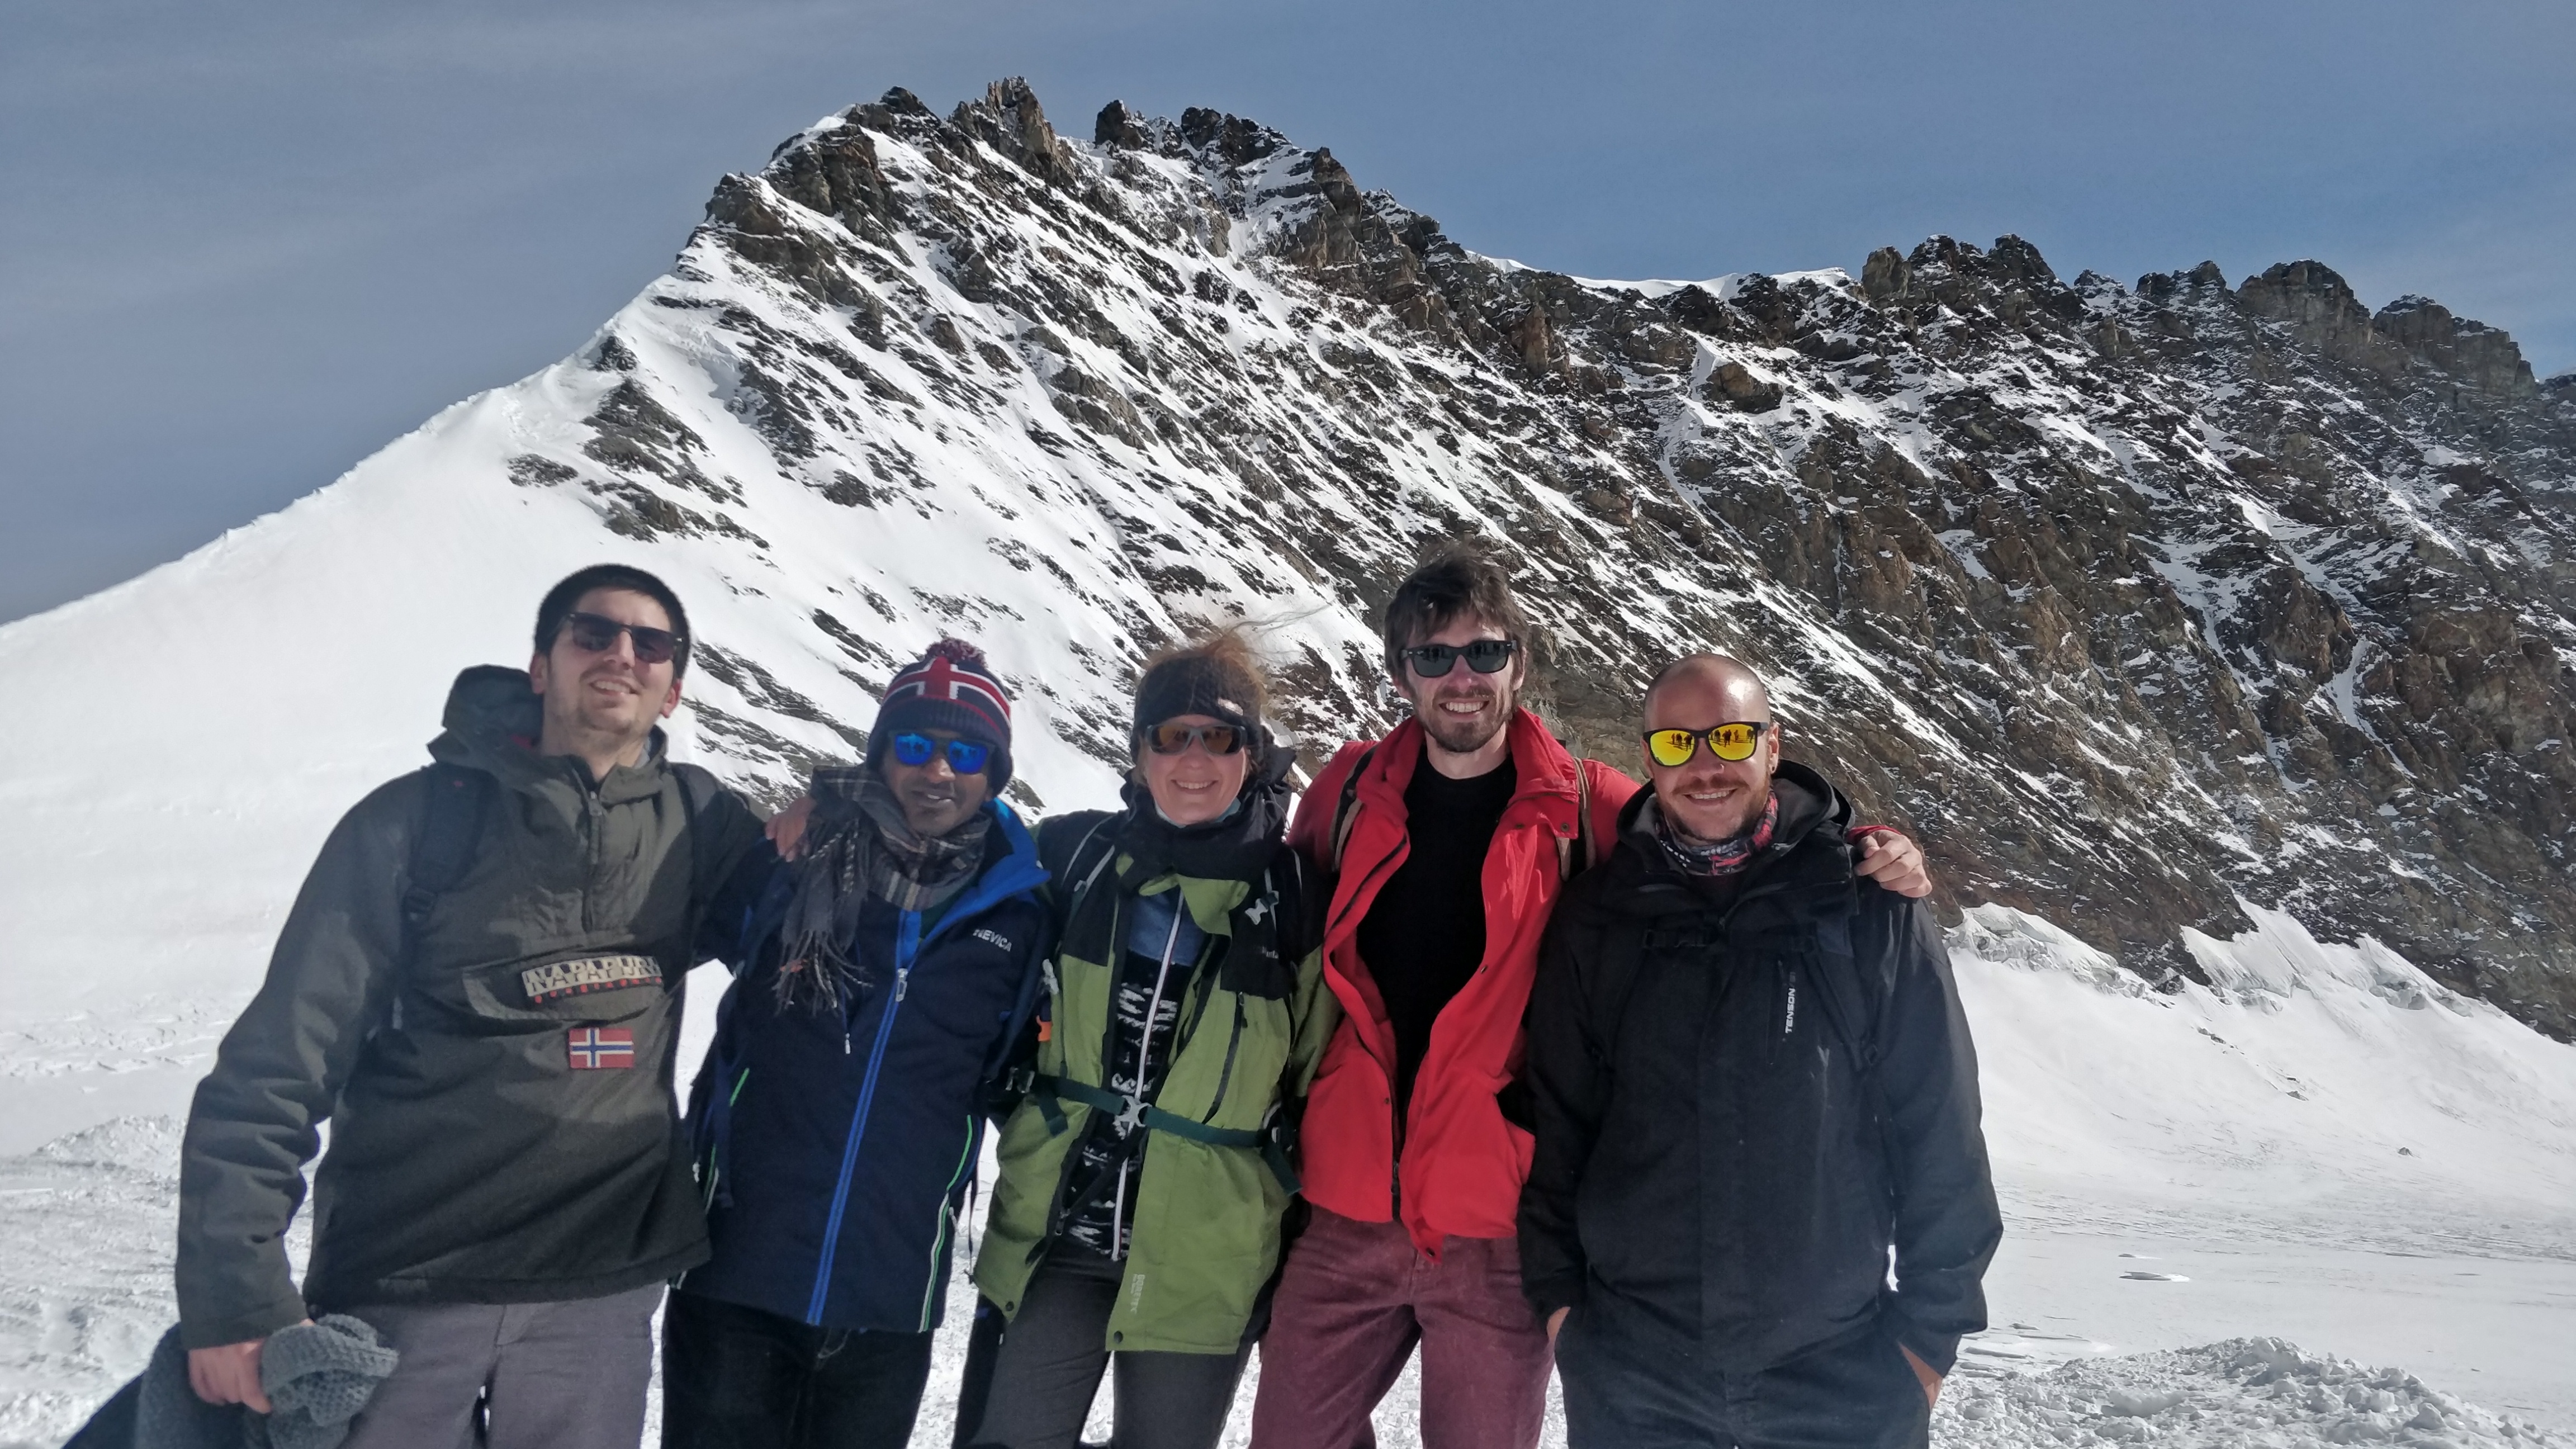 Our group at Jungfraujoch